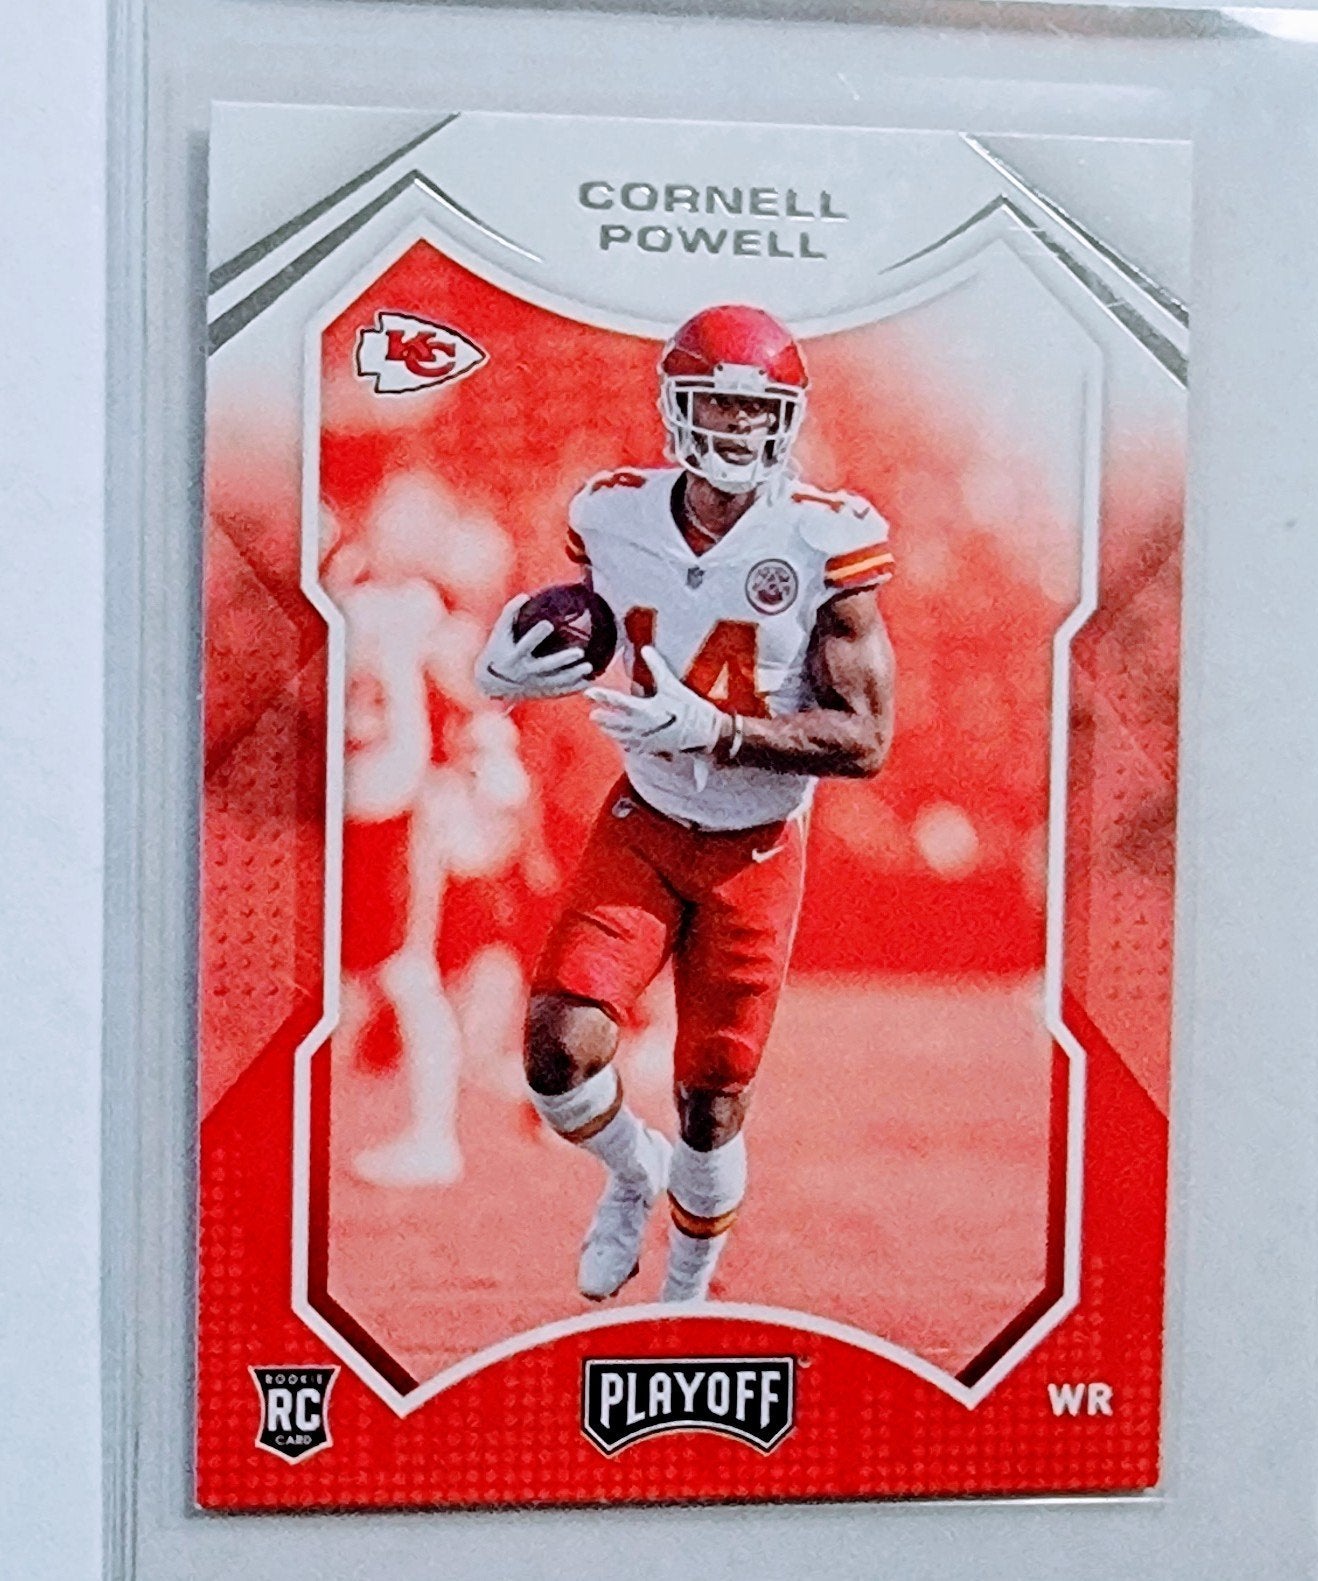 2021 Panini Playoffs Cornell Powell Rookie Football Card AVM1 simple Xclusive Collectibles   